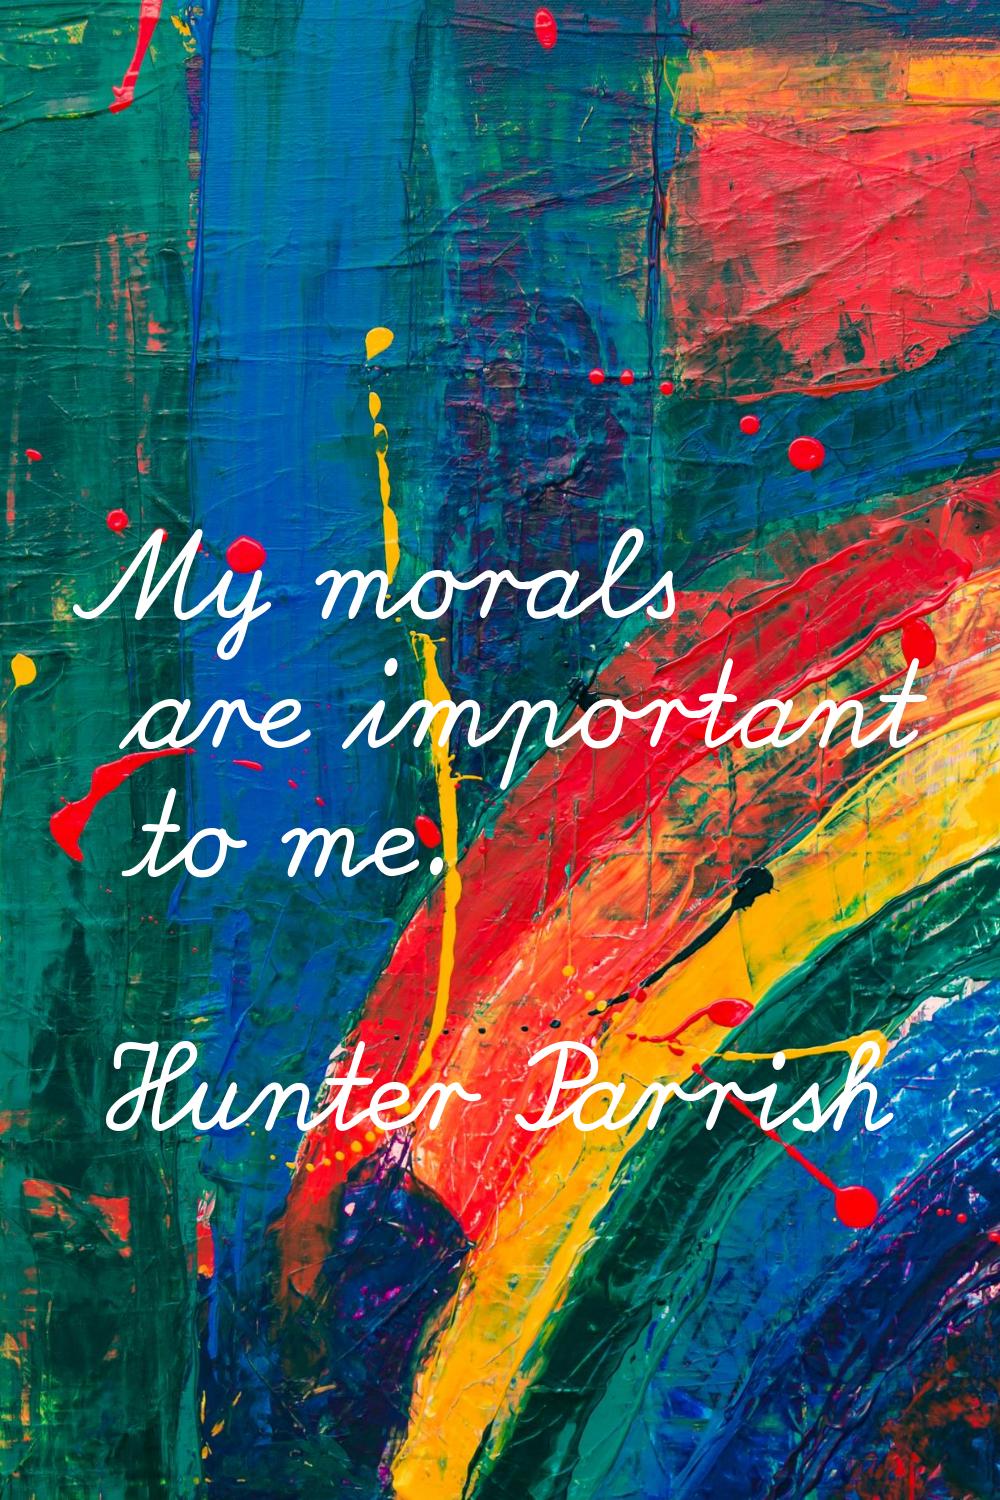 My morals are important to me.